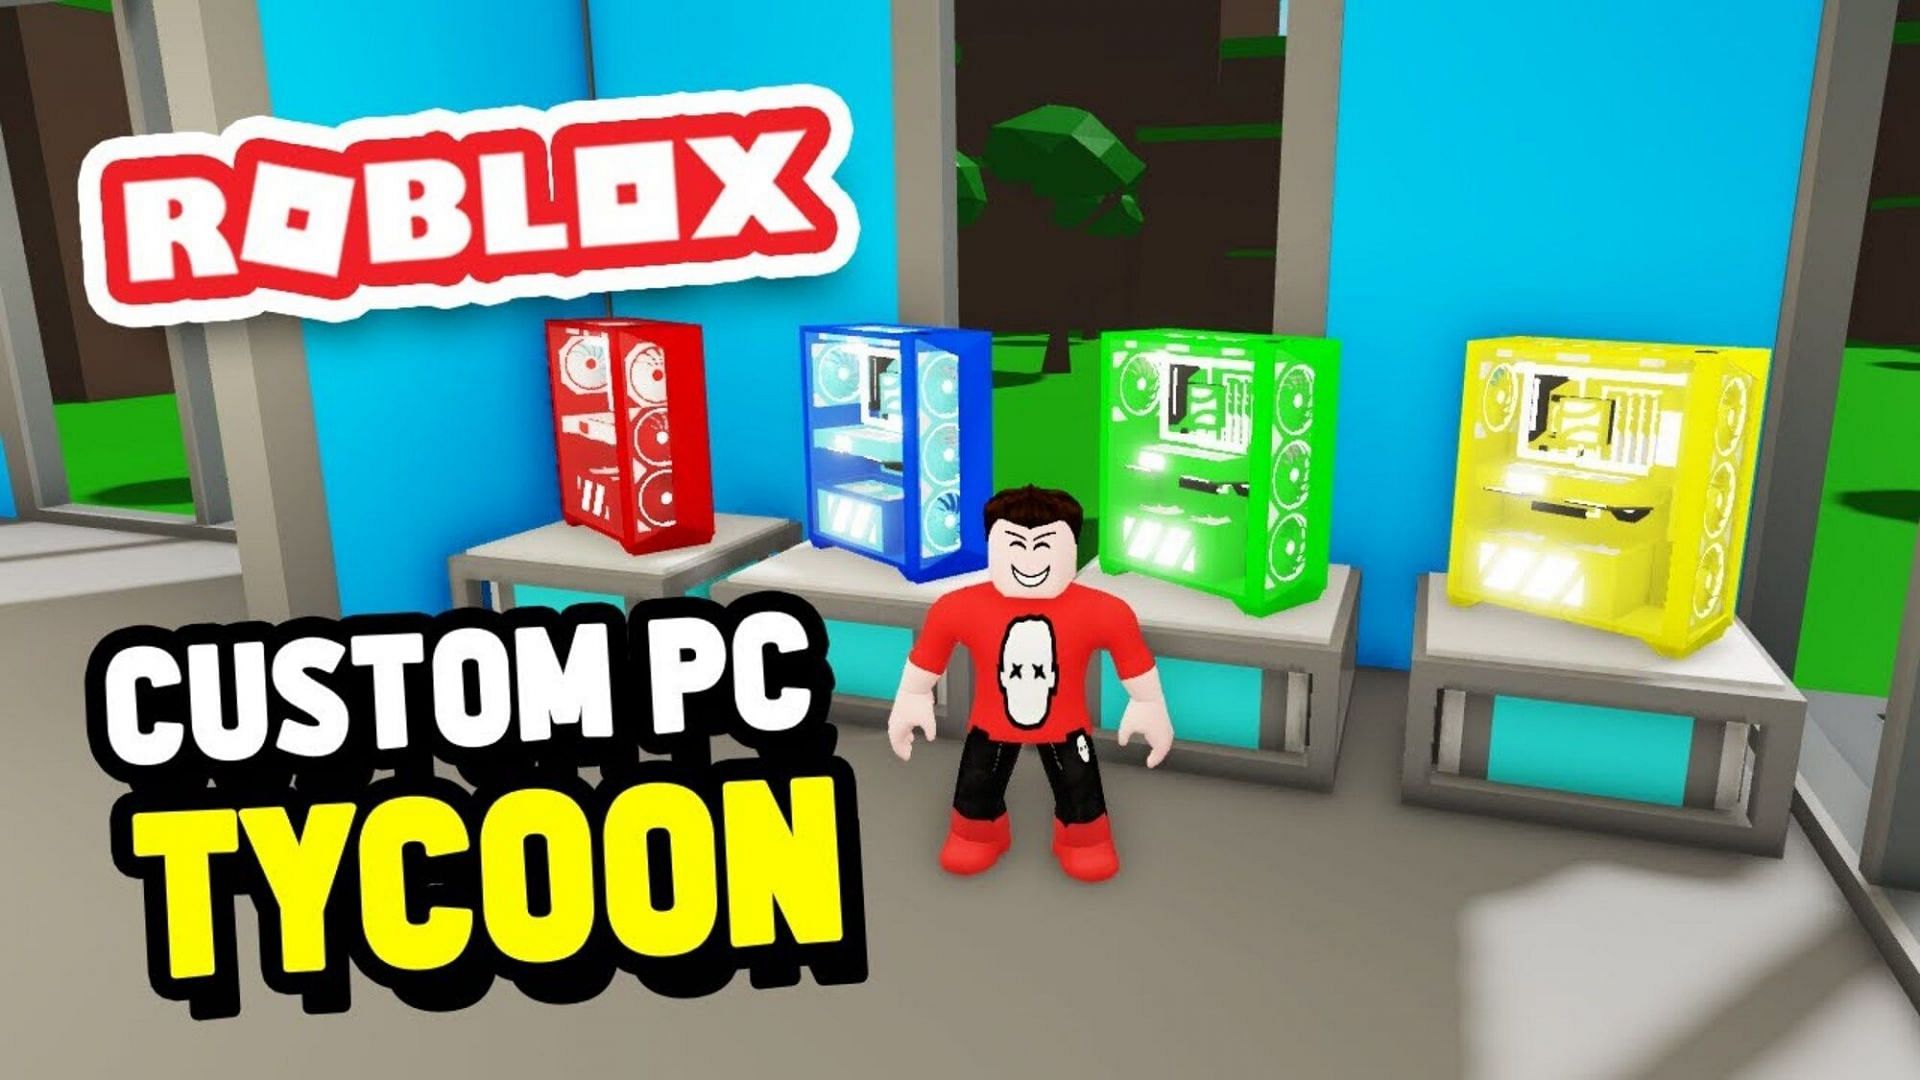 Roblox Custom PC Tycoon codes for free parts and cash (Image via Roblox)